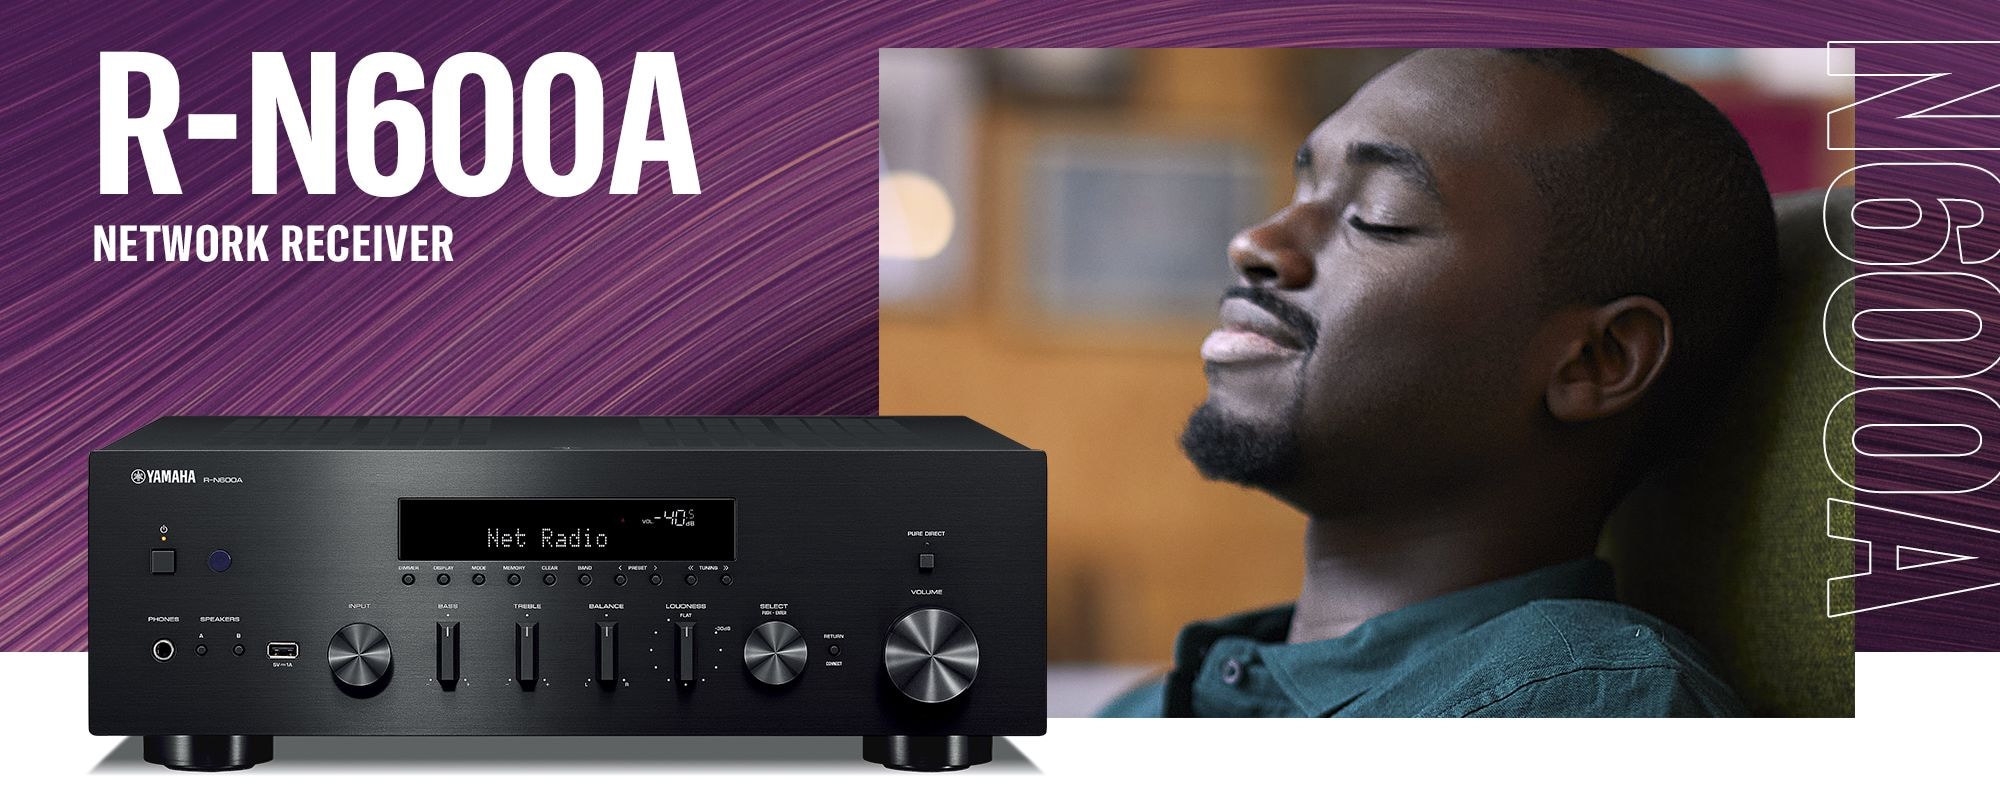 header banner image of Yamaha R-N600A Network Receiver